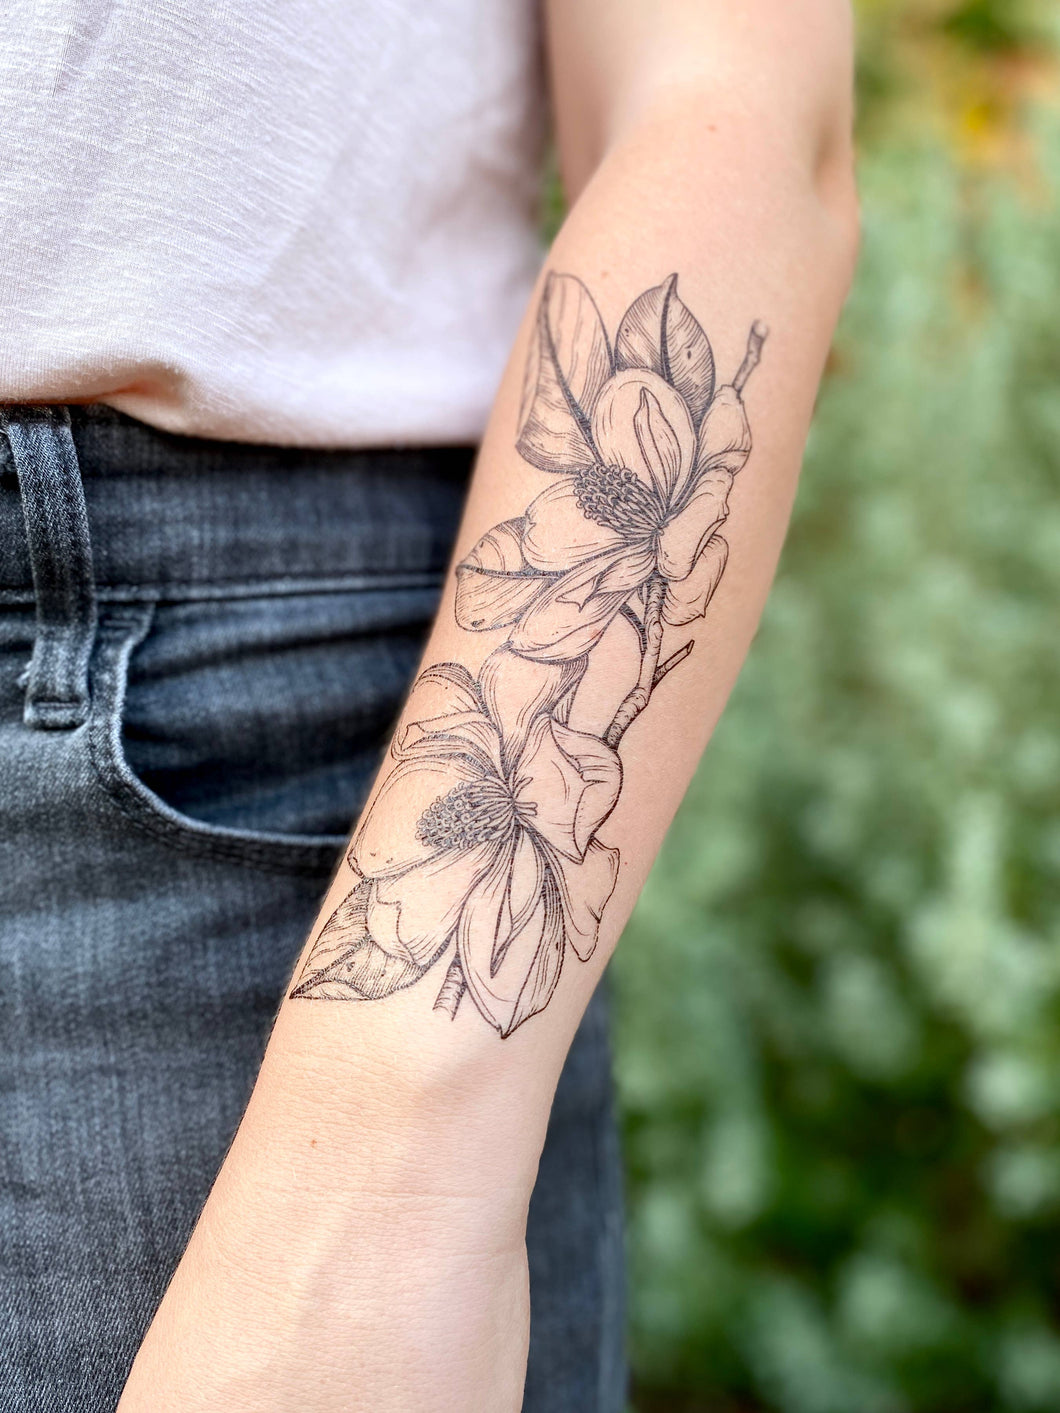 Express yourself with this fun nature-themed temporary tattoo.  This hand-drawn floral design measures 6.25 by 2.5 inches with black lines and stippling.   Made in Austin, TX USA